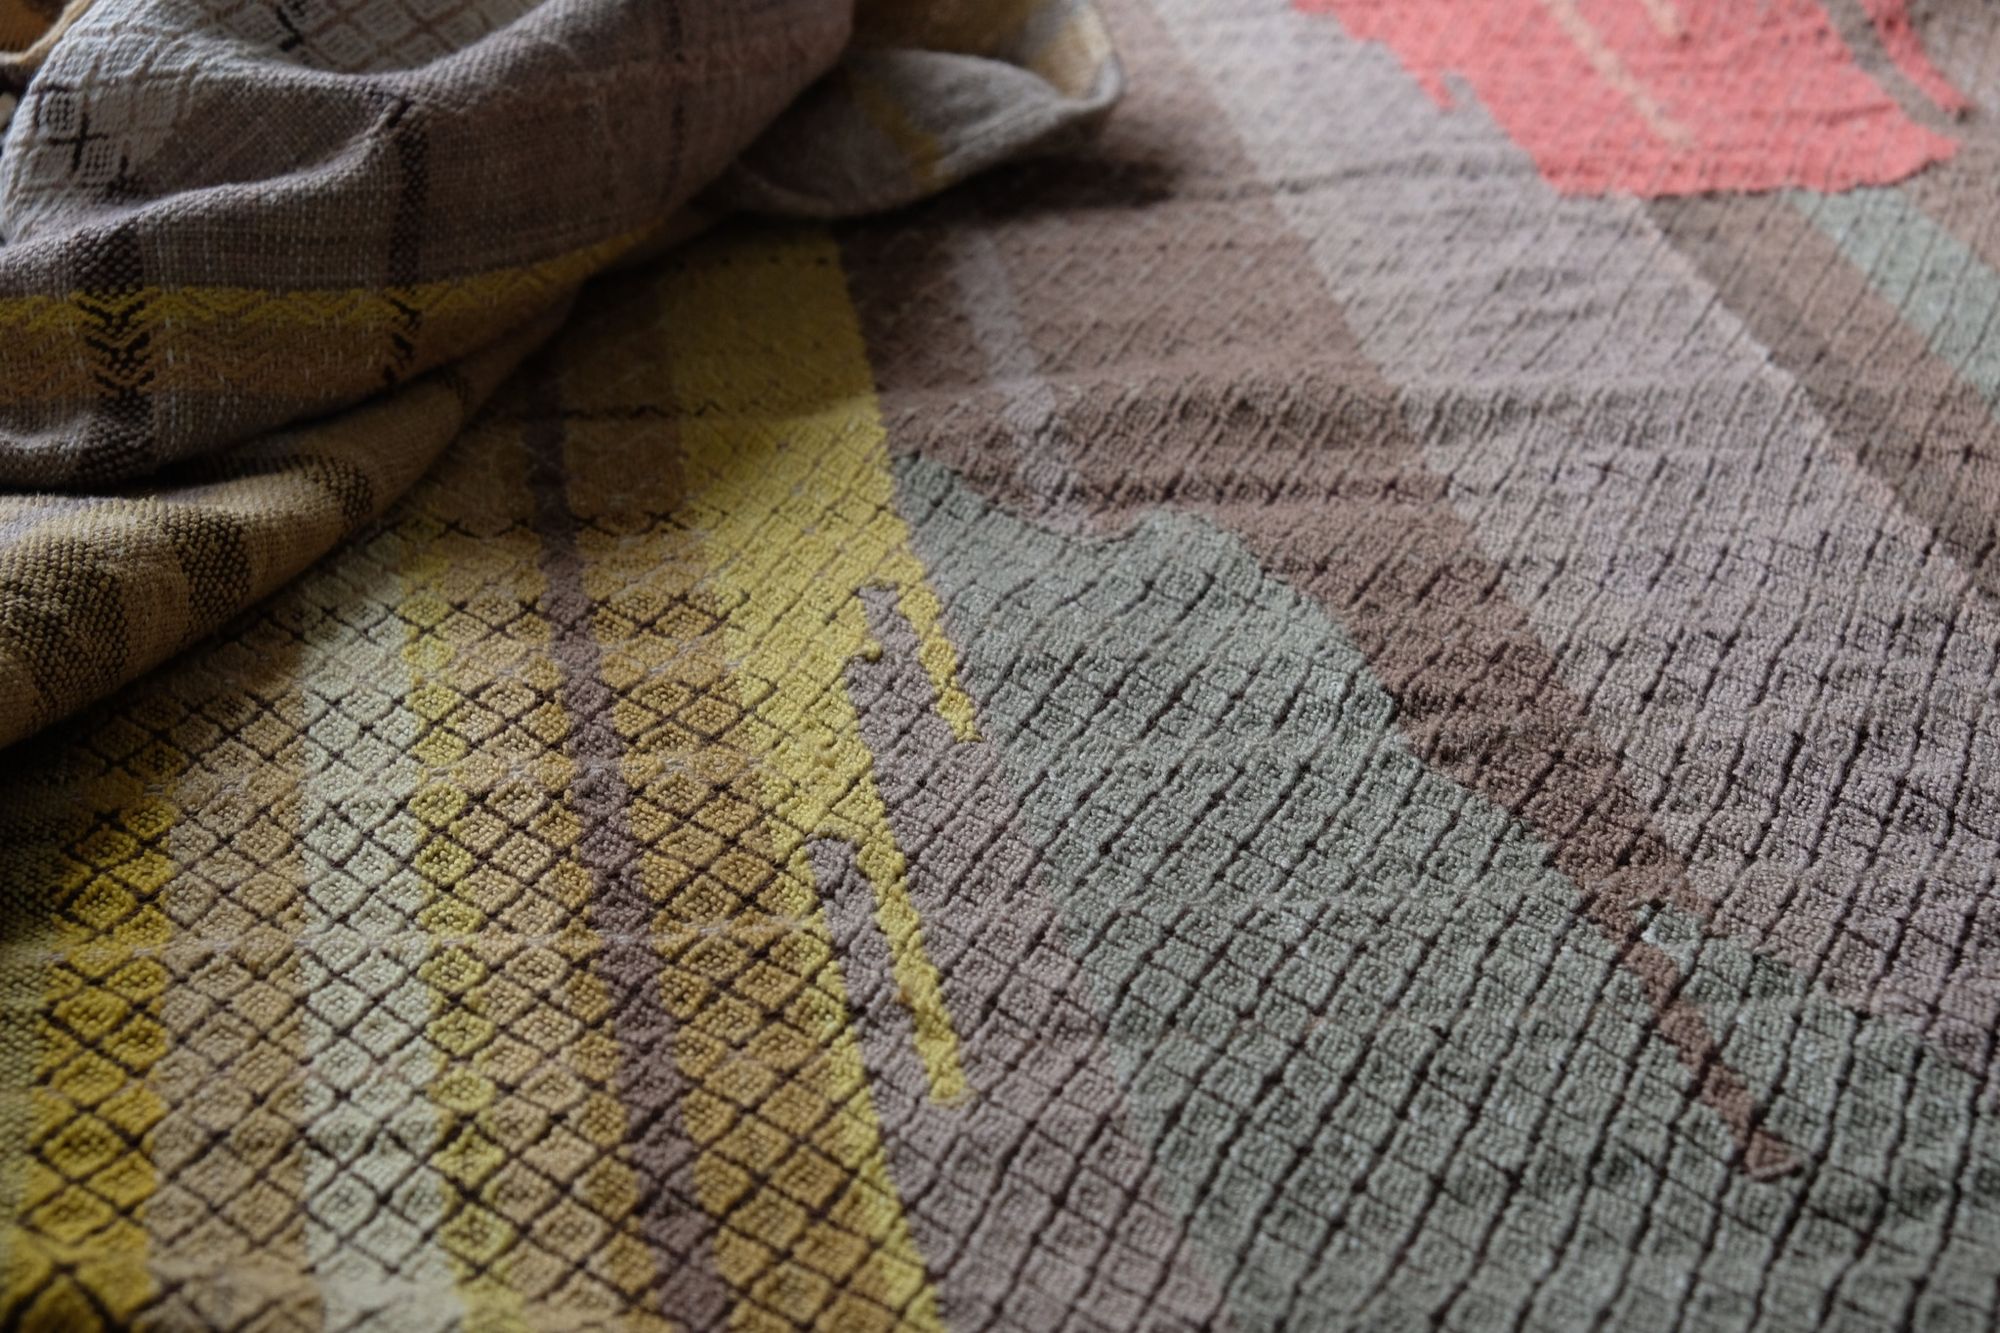 handwoven fabric with textured diamond pattern in soft earth tones of brown, salmon, green peach and yellow